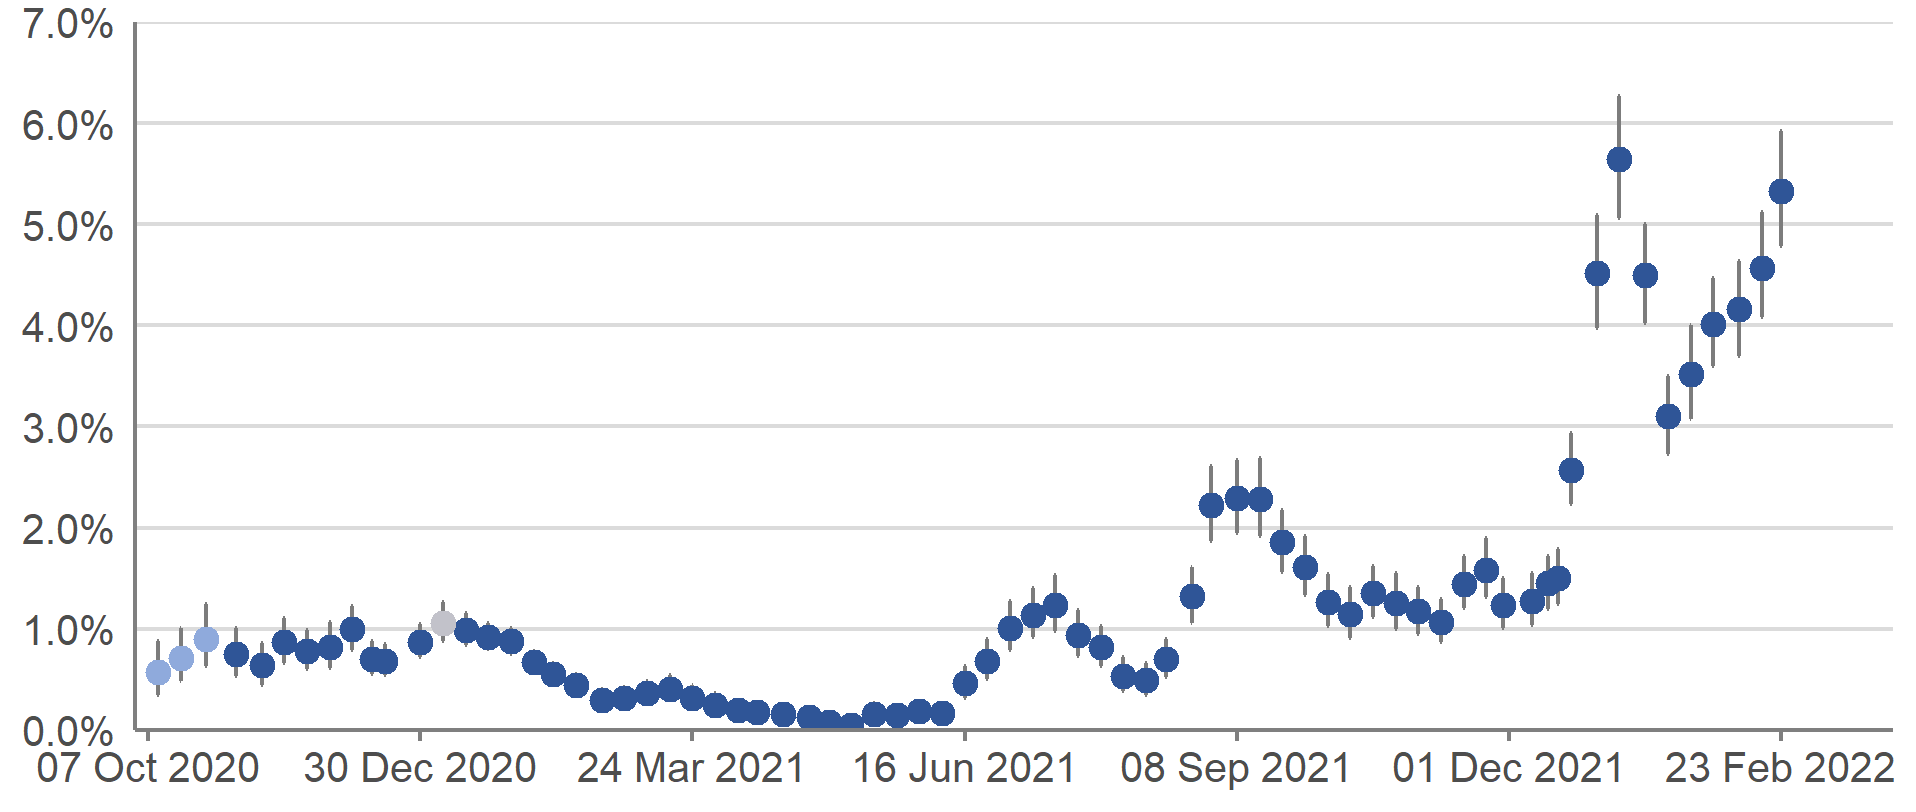 The estimated percentage of the population testing positive for COVID-19 reached the highest peak since the start of the pandemic in the week 1 to 7 January 2022, after three weeks of rapid increase. The percentage of people testing positive for COVID-19 then decreased up to the week ending 22 January 2022. In the latest five weeks, the estimates of positivity in Scotland have been increasing, but more steadily than during the festive period.